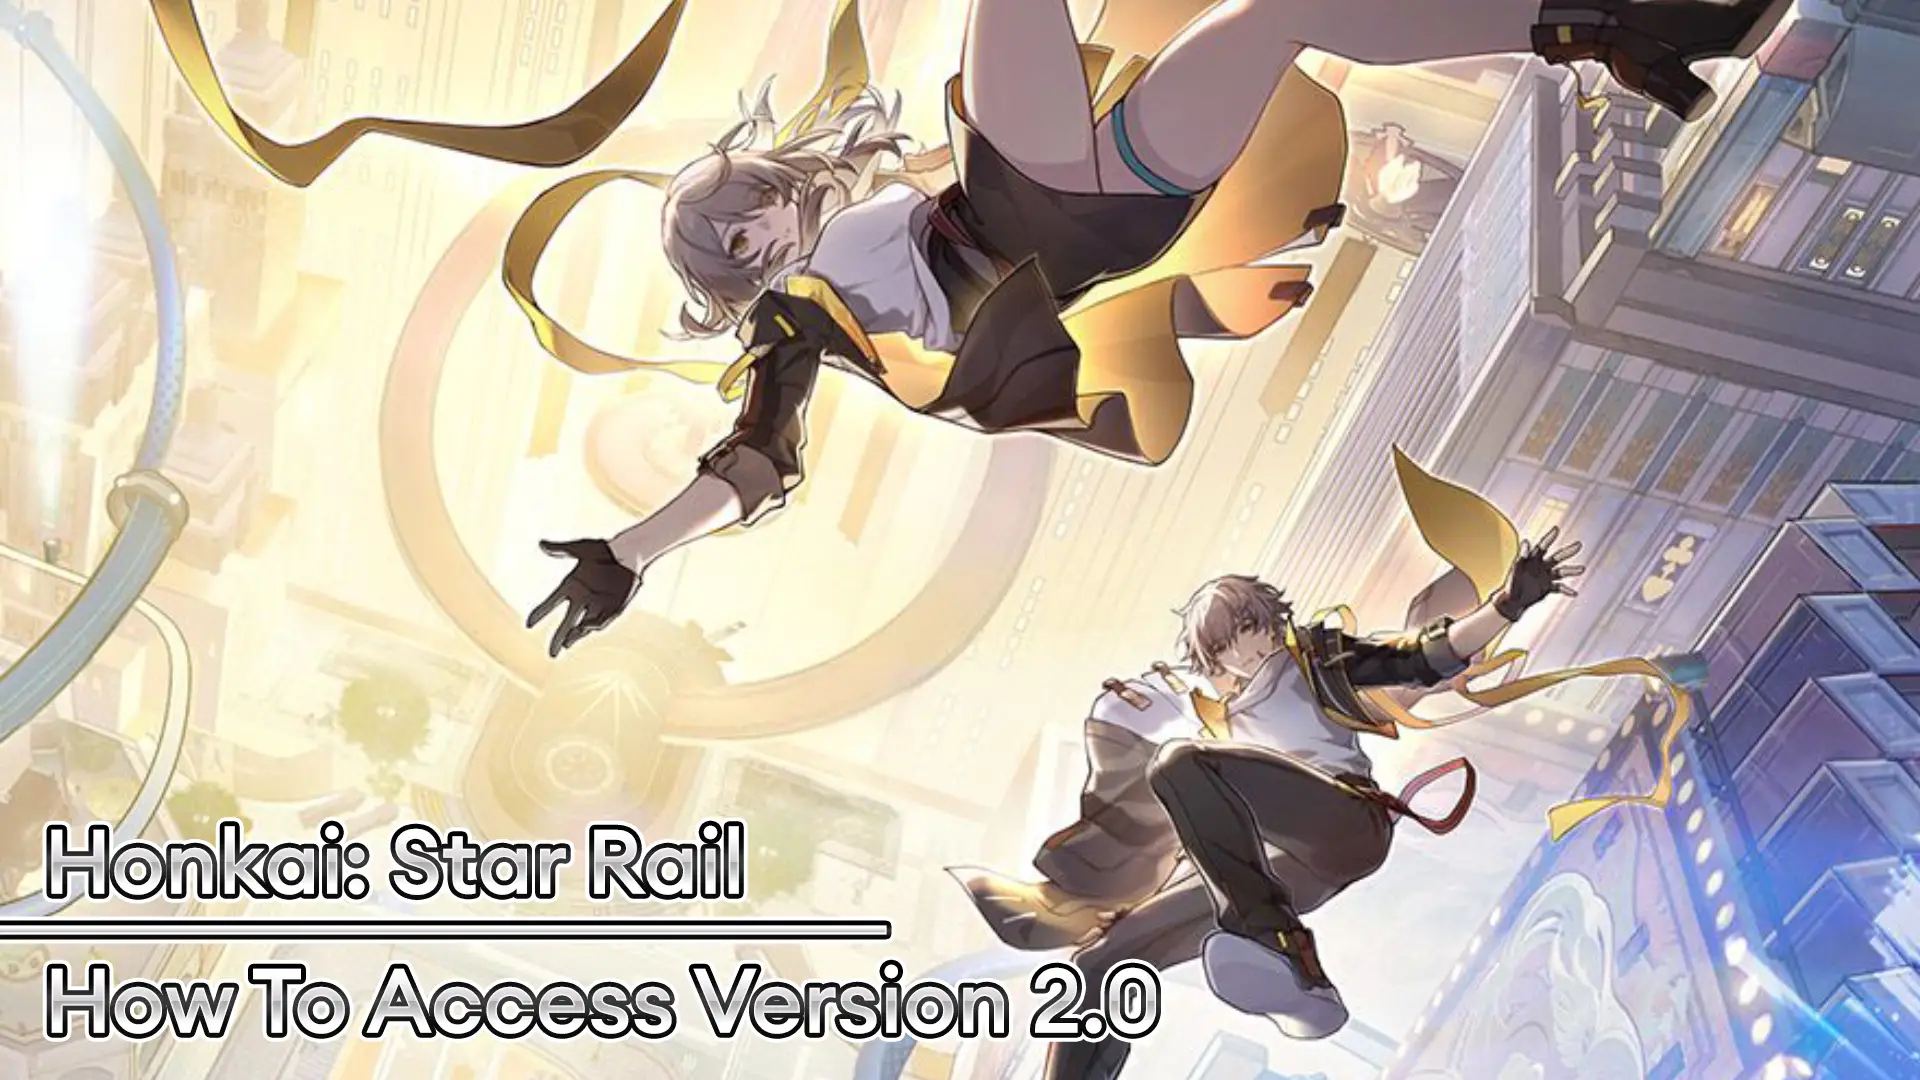 Honkai Star Rail ― How to Access Version 2.0 Content